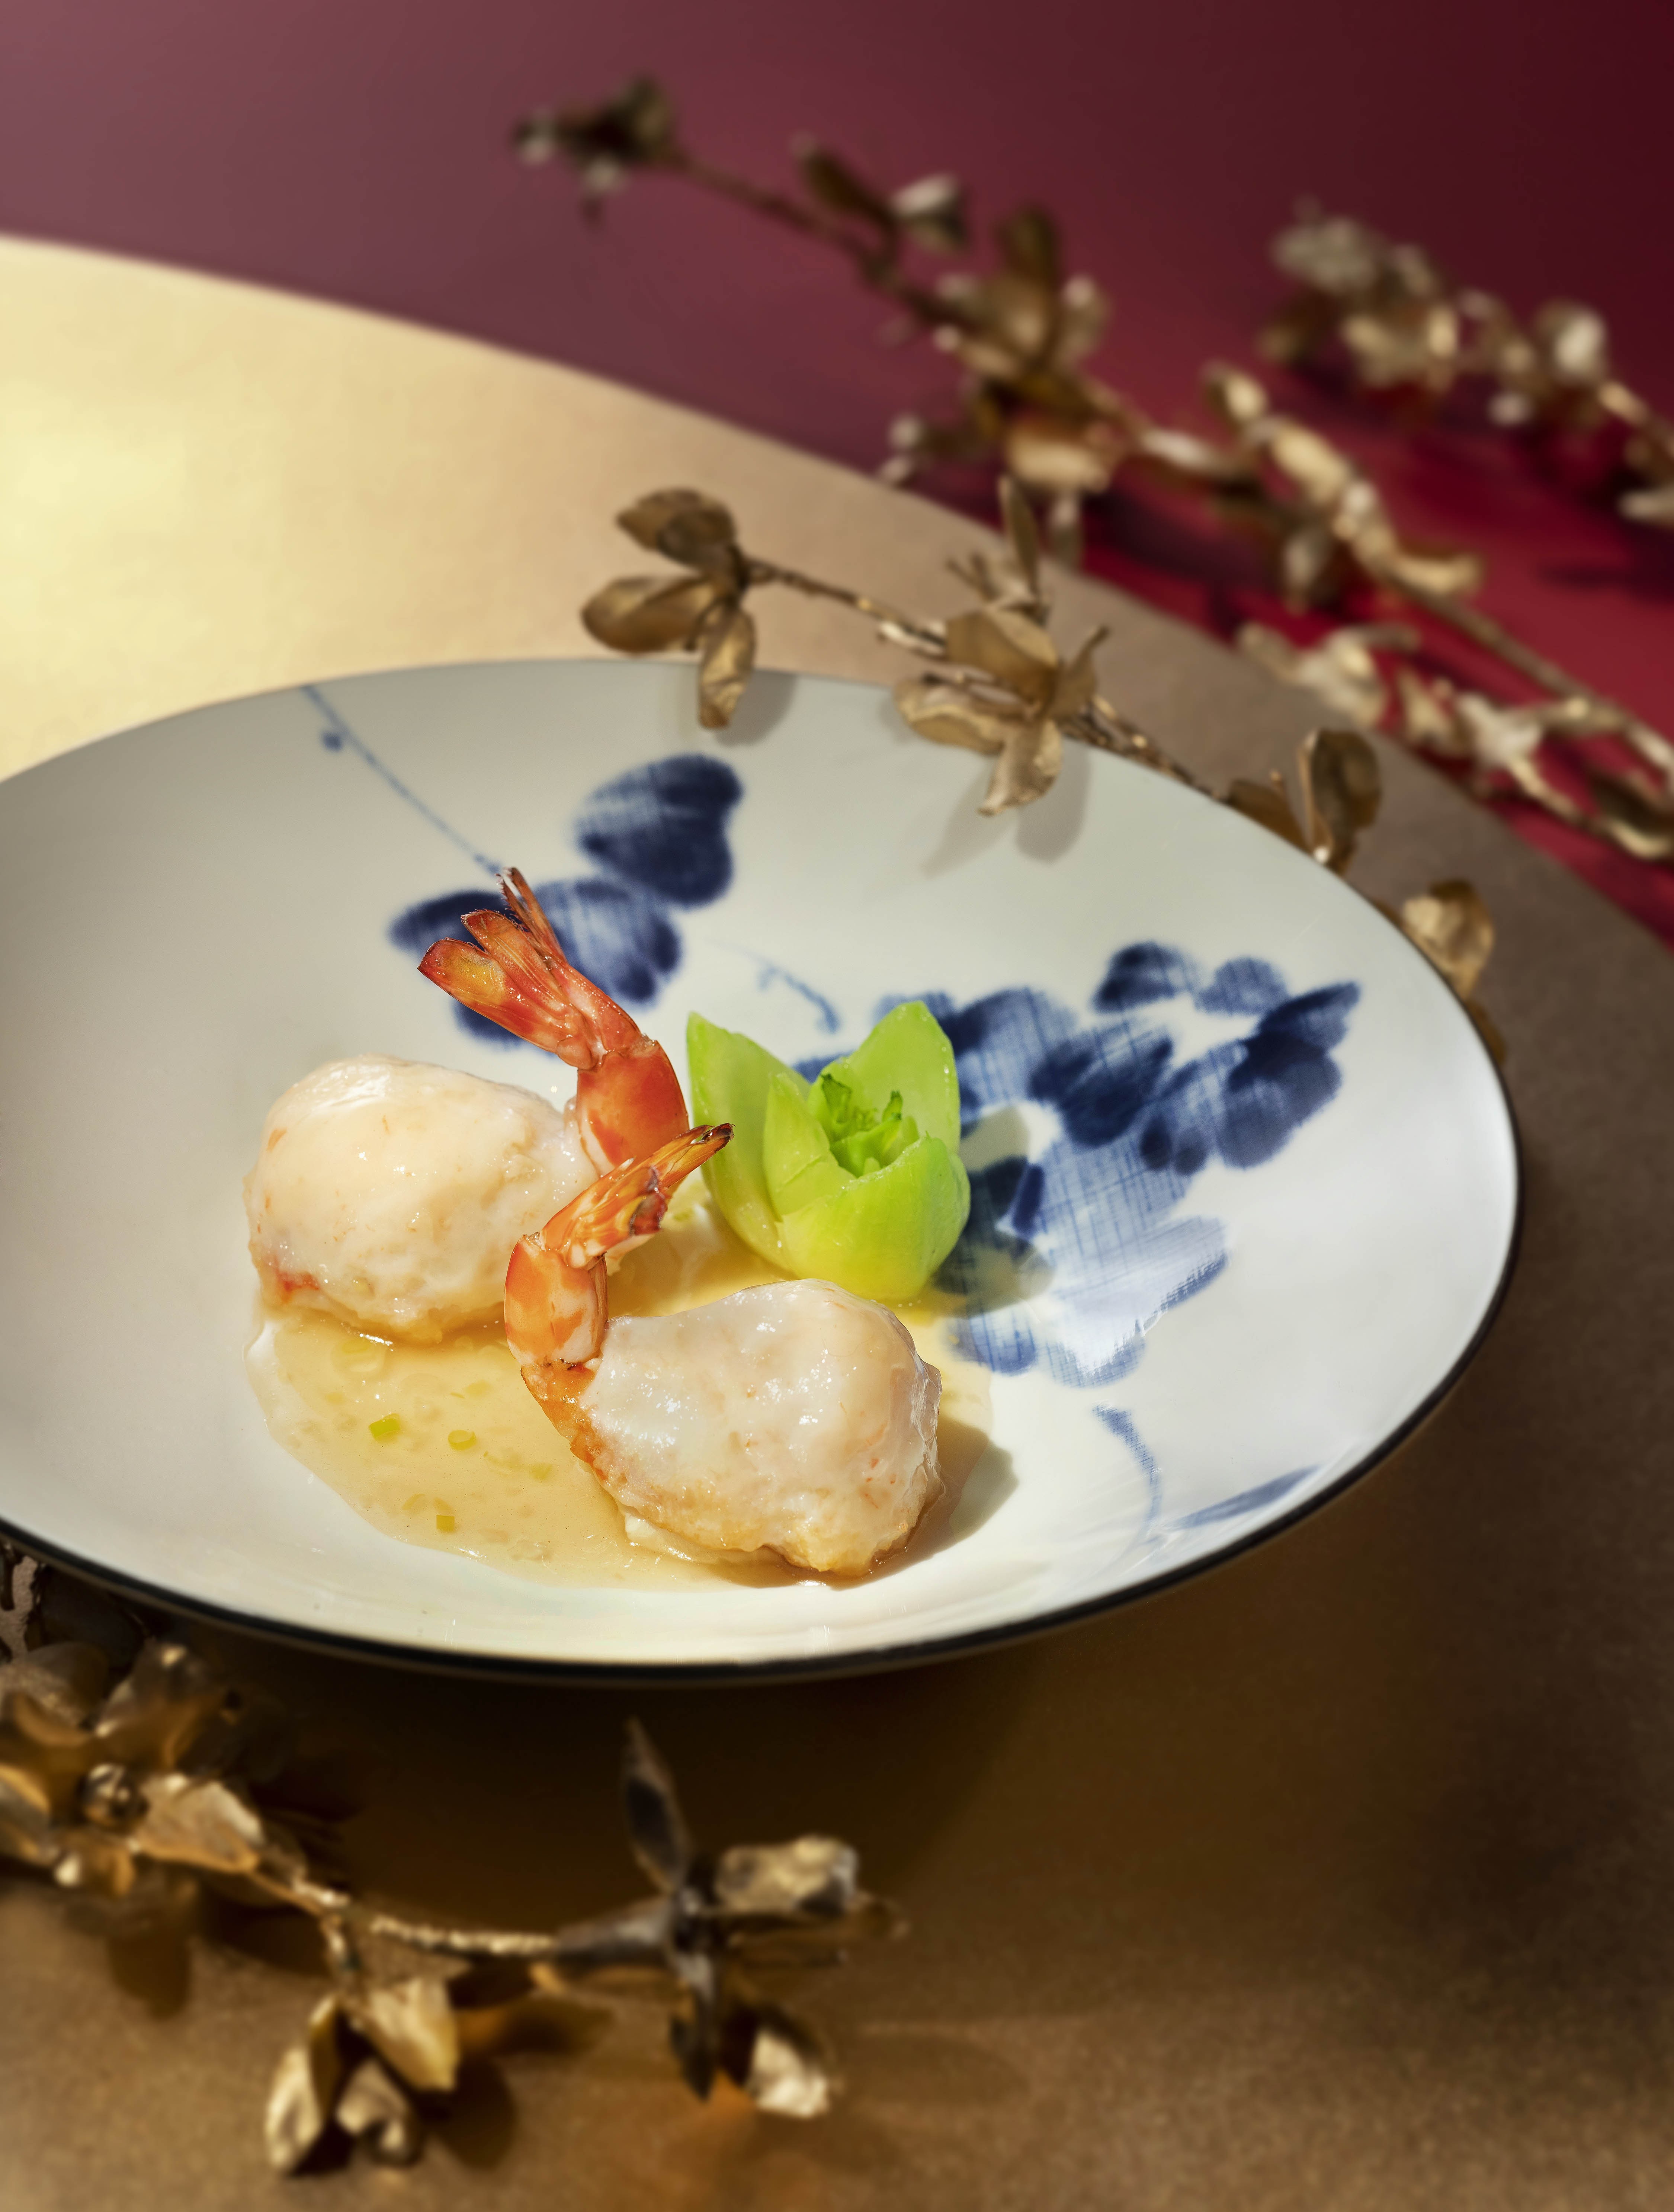 Pan-seared Kuruma shrimp with shrimp mousse is one of the delicious Lunar New Year lunch and dinner menu offerings being served from February 4 to 12 at Lai Heen restaurant at The Ritz-Carlton, Macau.